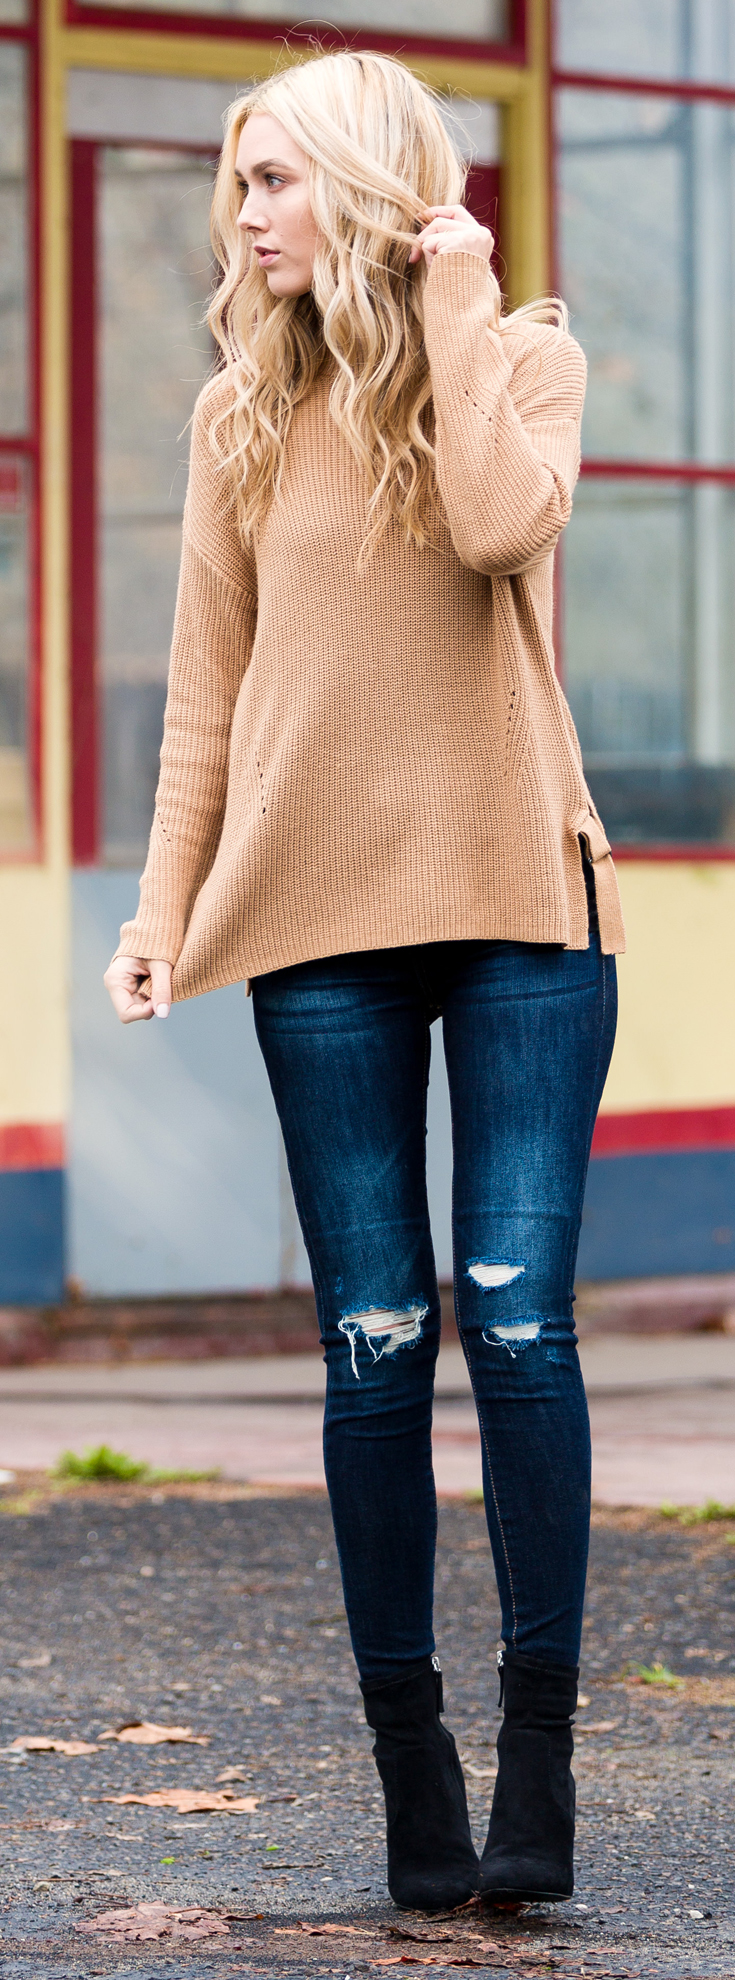 Camel sweater, Blue jeans and black boots - Sheridan Gregory, Blue Eyed Finch.